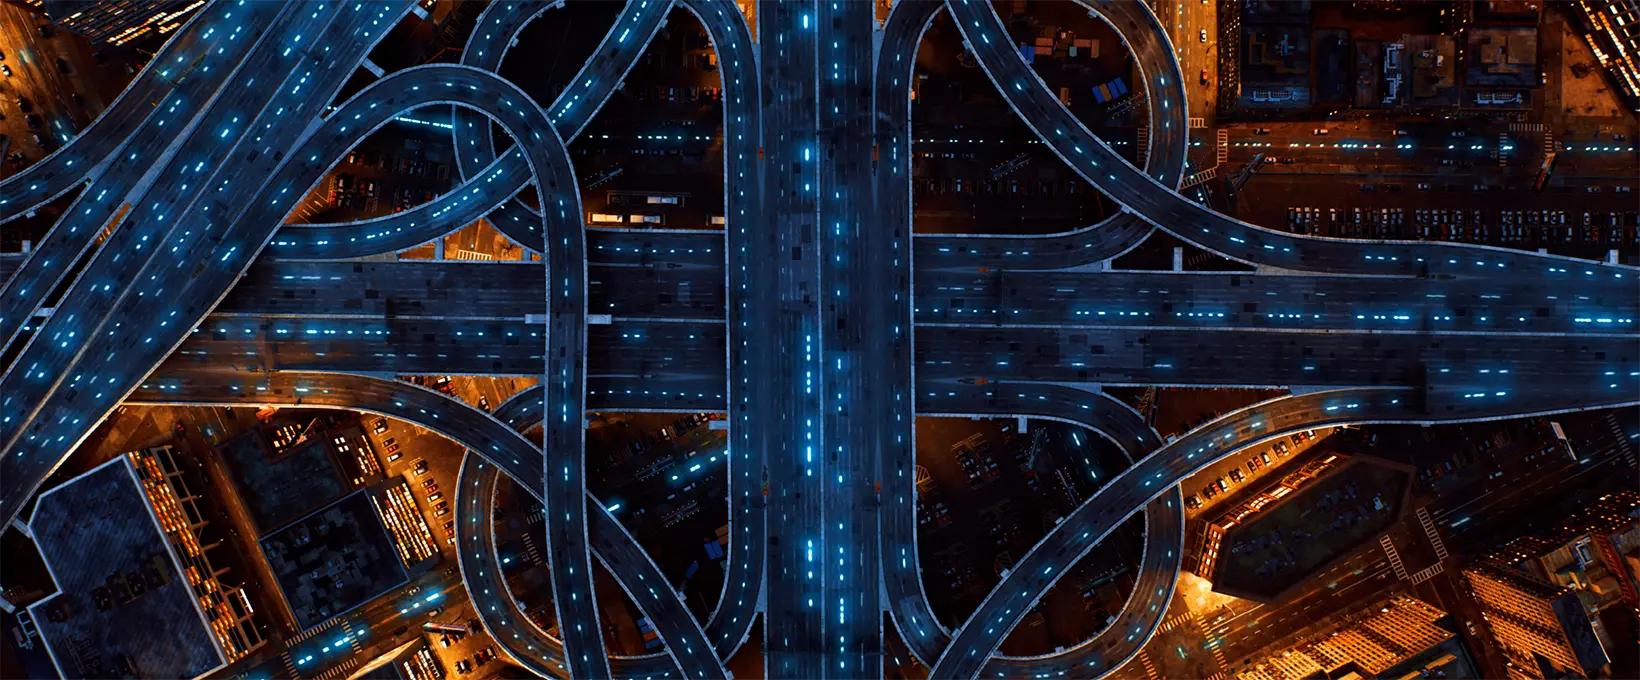 Looking down during the nighttime over a large traffic interchange with several ramps and loops